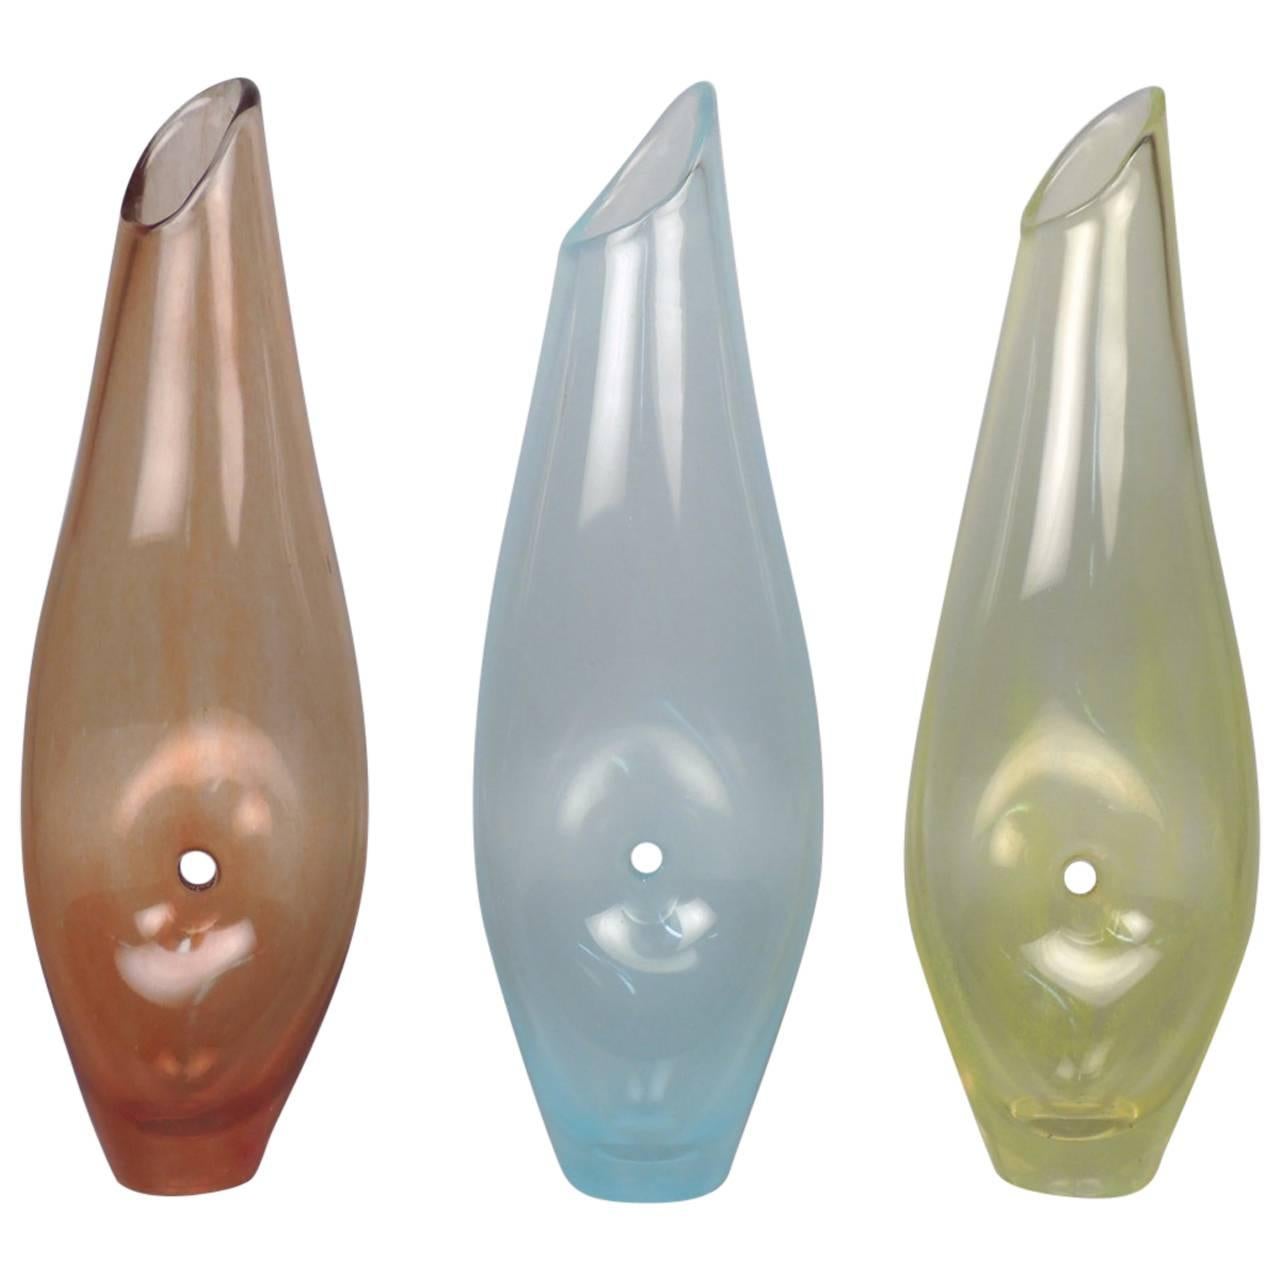 Three Modernist "Forato" Art Glass Vases by Jacqueline Terpins